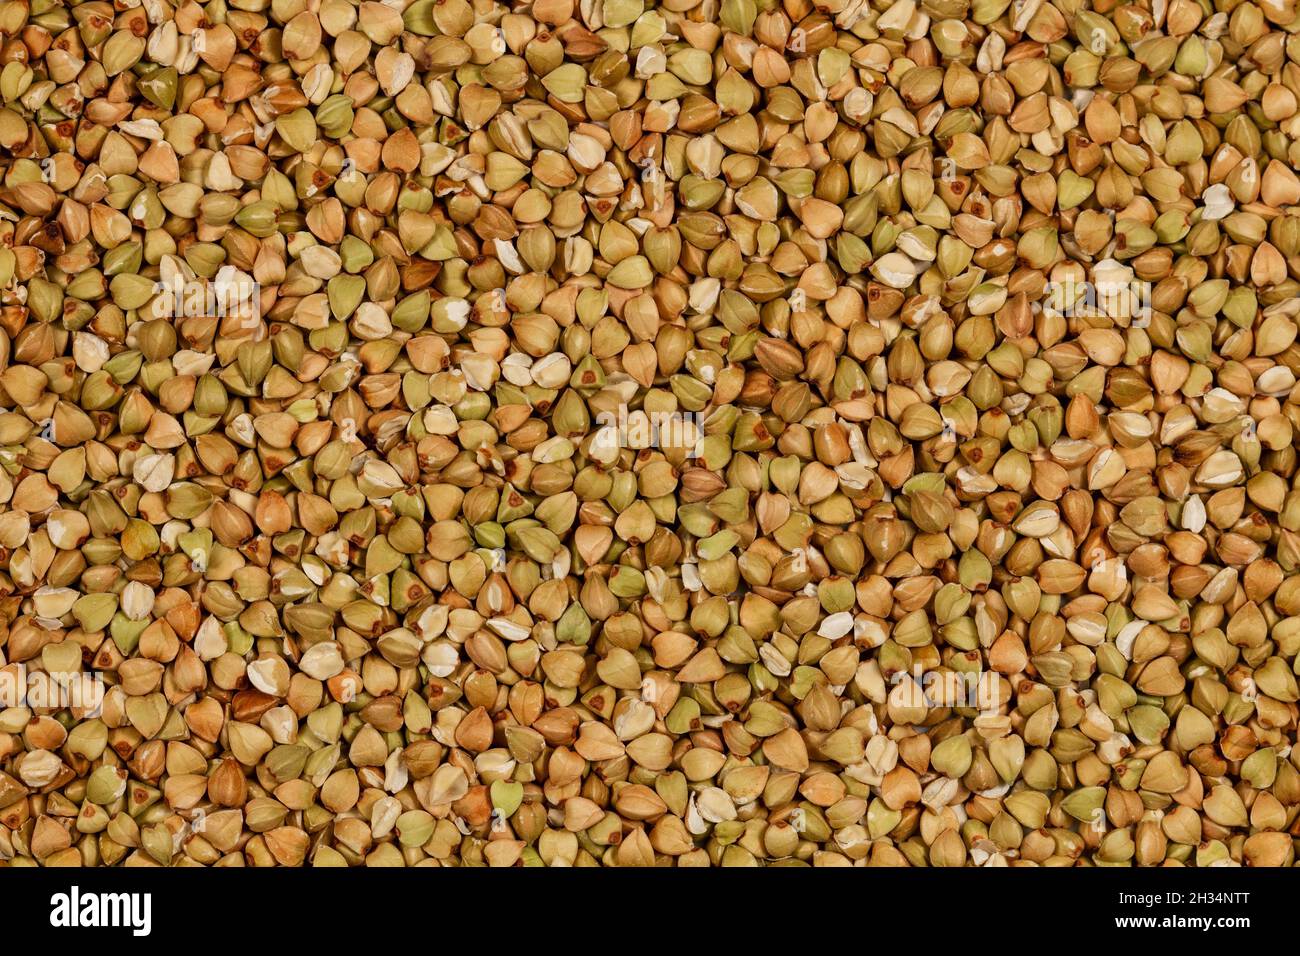 Natural Green Raw Buckwheat Groats. Raw not steamed buckwheat grains. Organic buckwheat grains ready for cooking porridge. Ecologically clean healthy Stock Photo